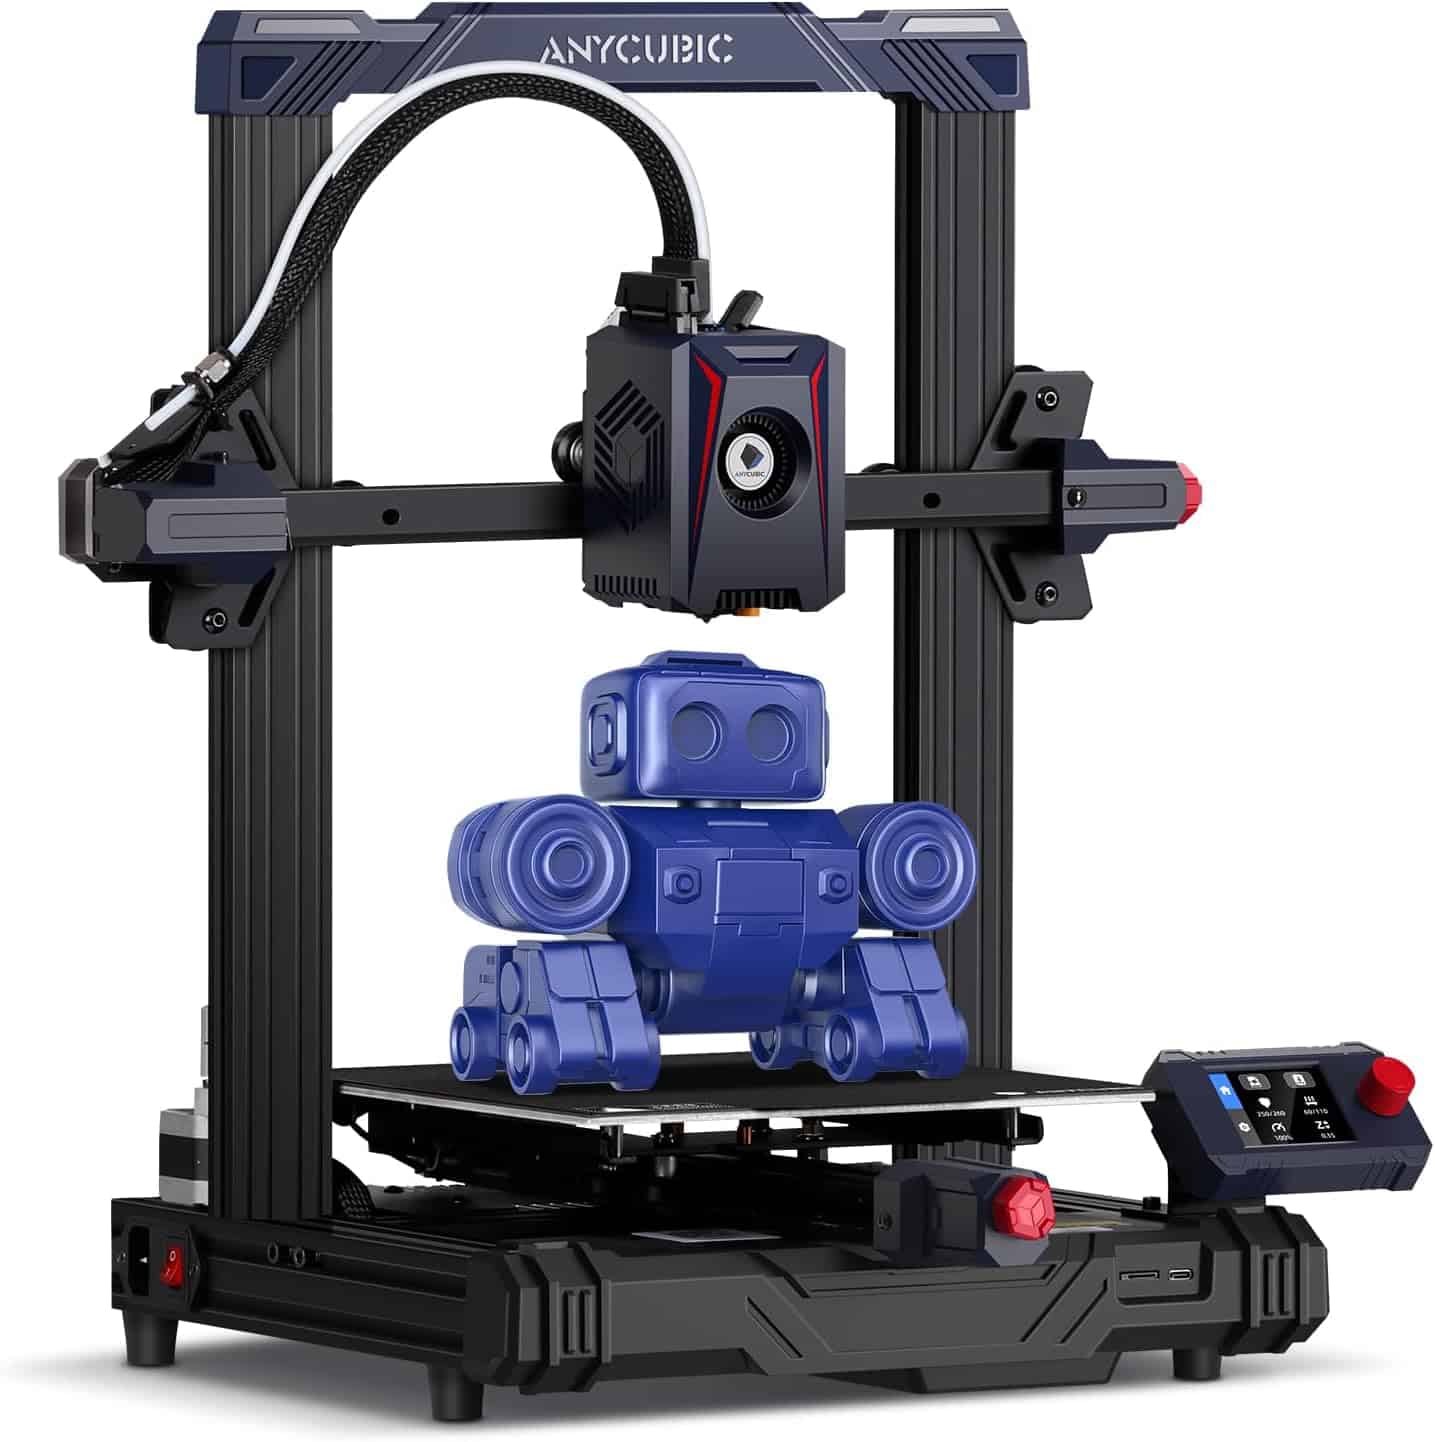 anycubic-kobra-2-neo-3d-printer-upgraded-250mms-faster-printing-speed-with-new-integrated-extruder-details-even-better-l